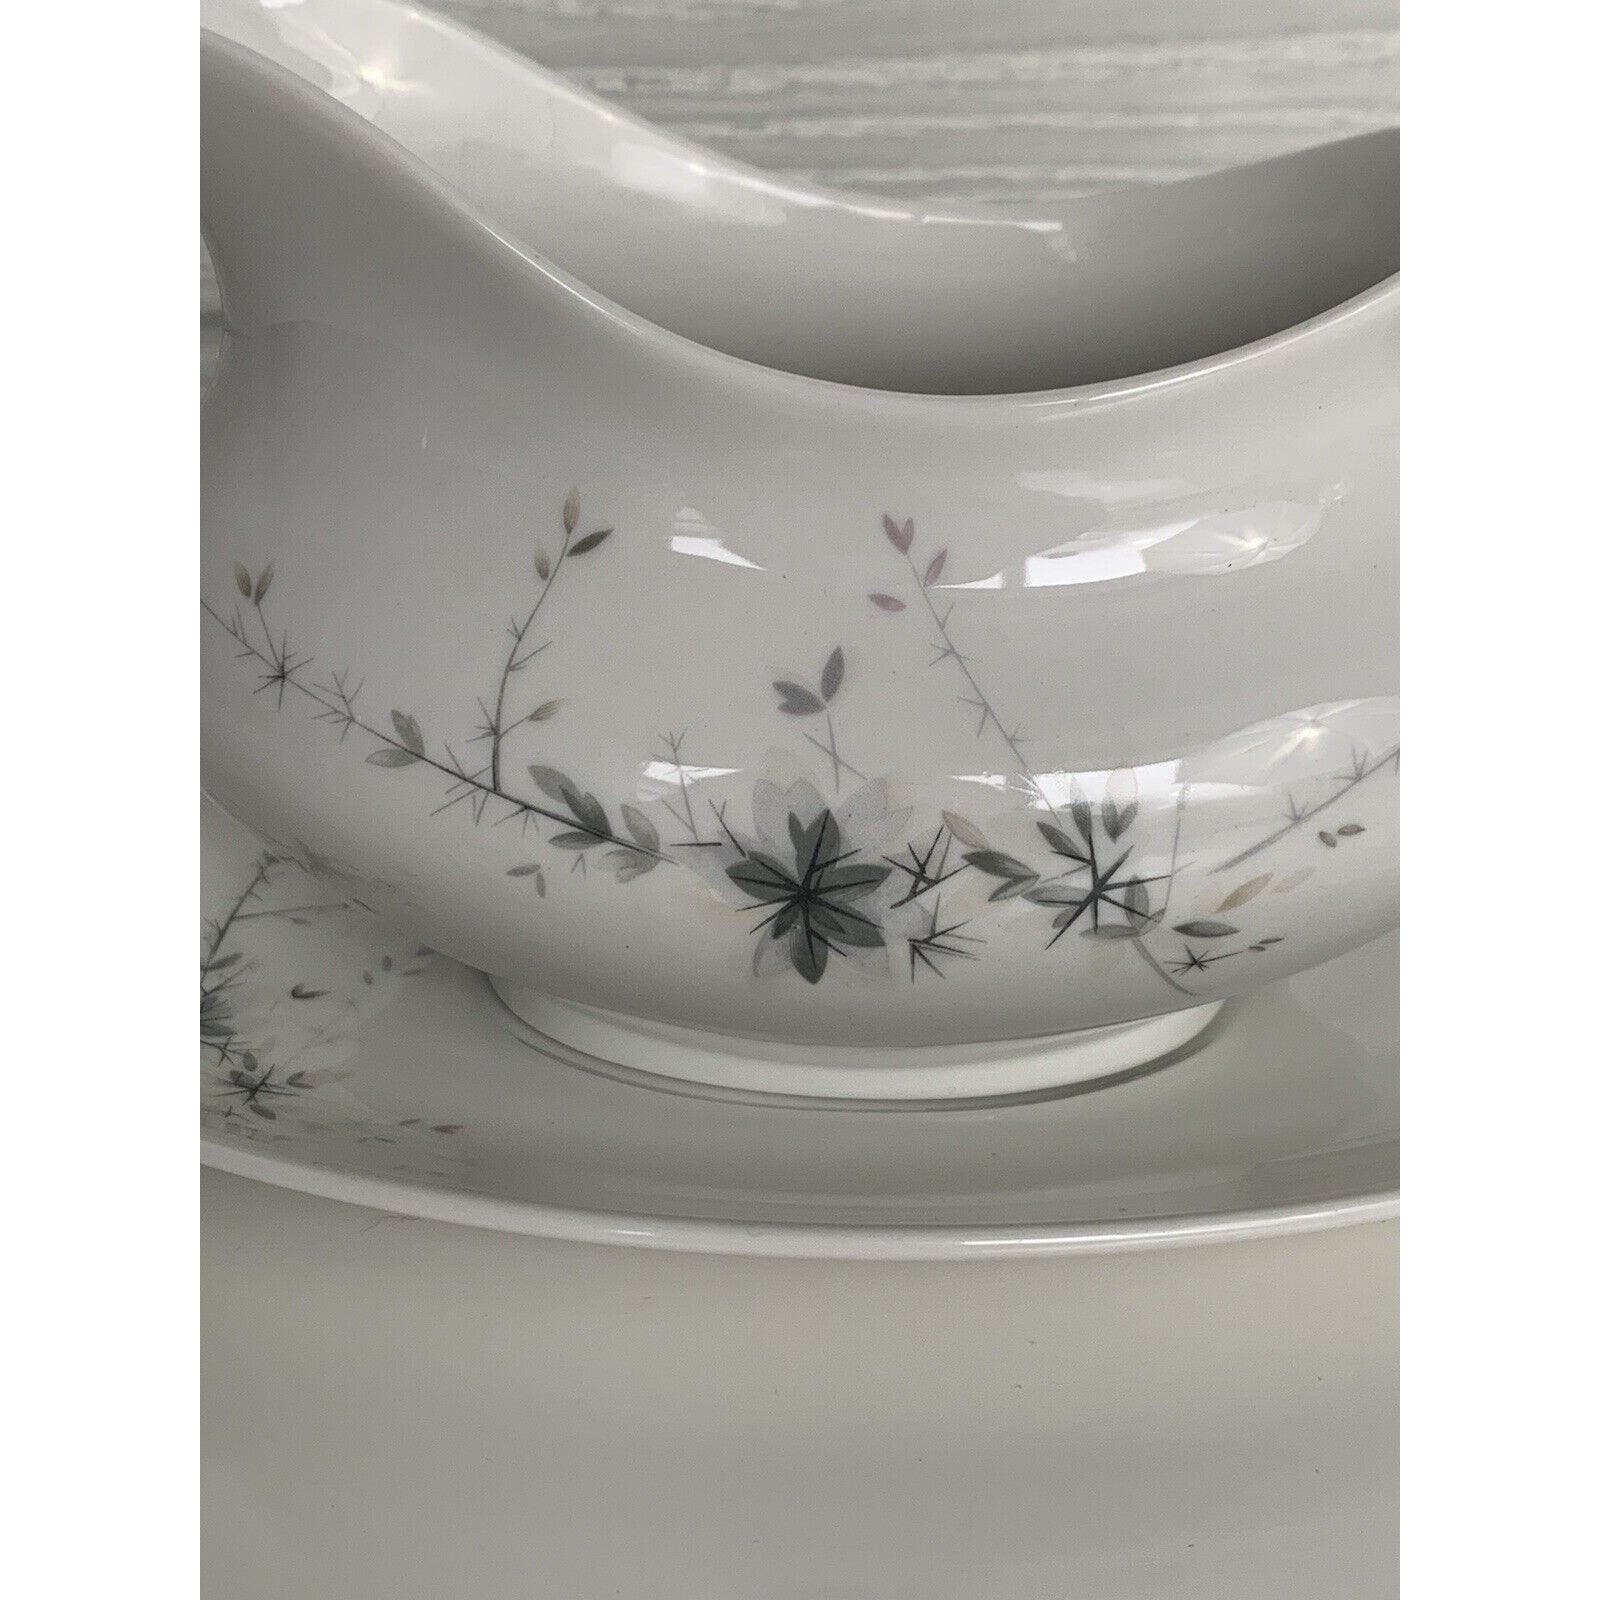 Royal Doulton Greenbrier Gravy Boat with Underplate Made in England e2Y3SVvNY